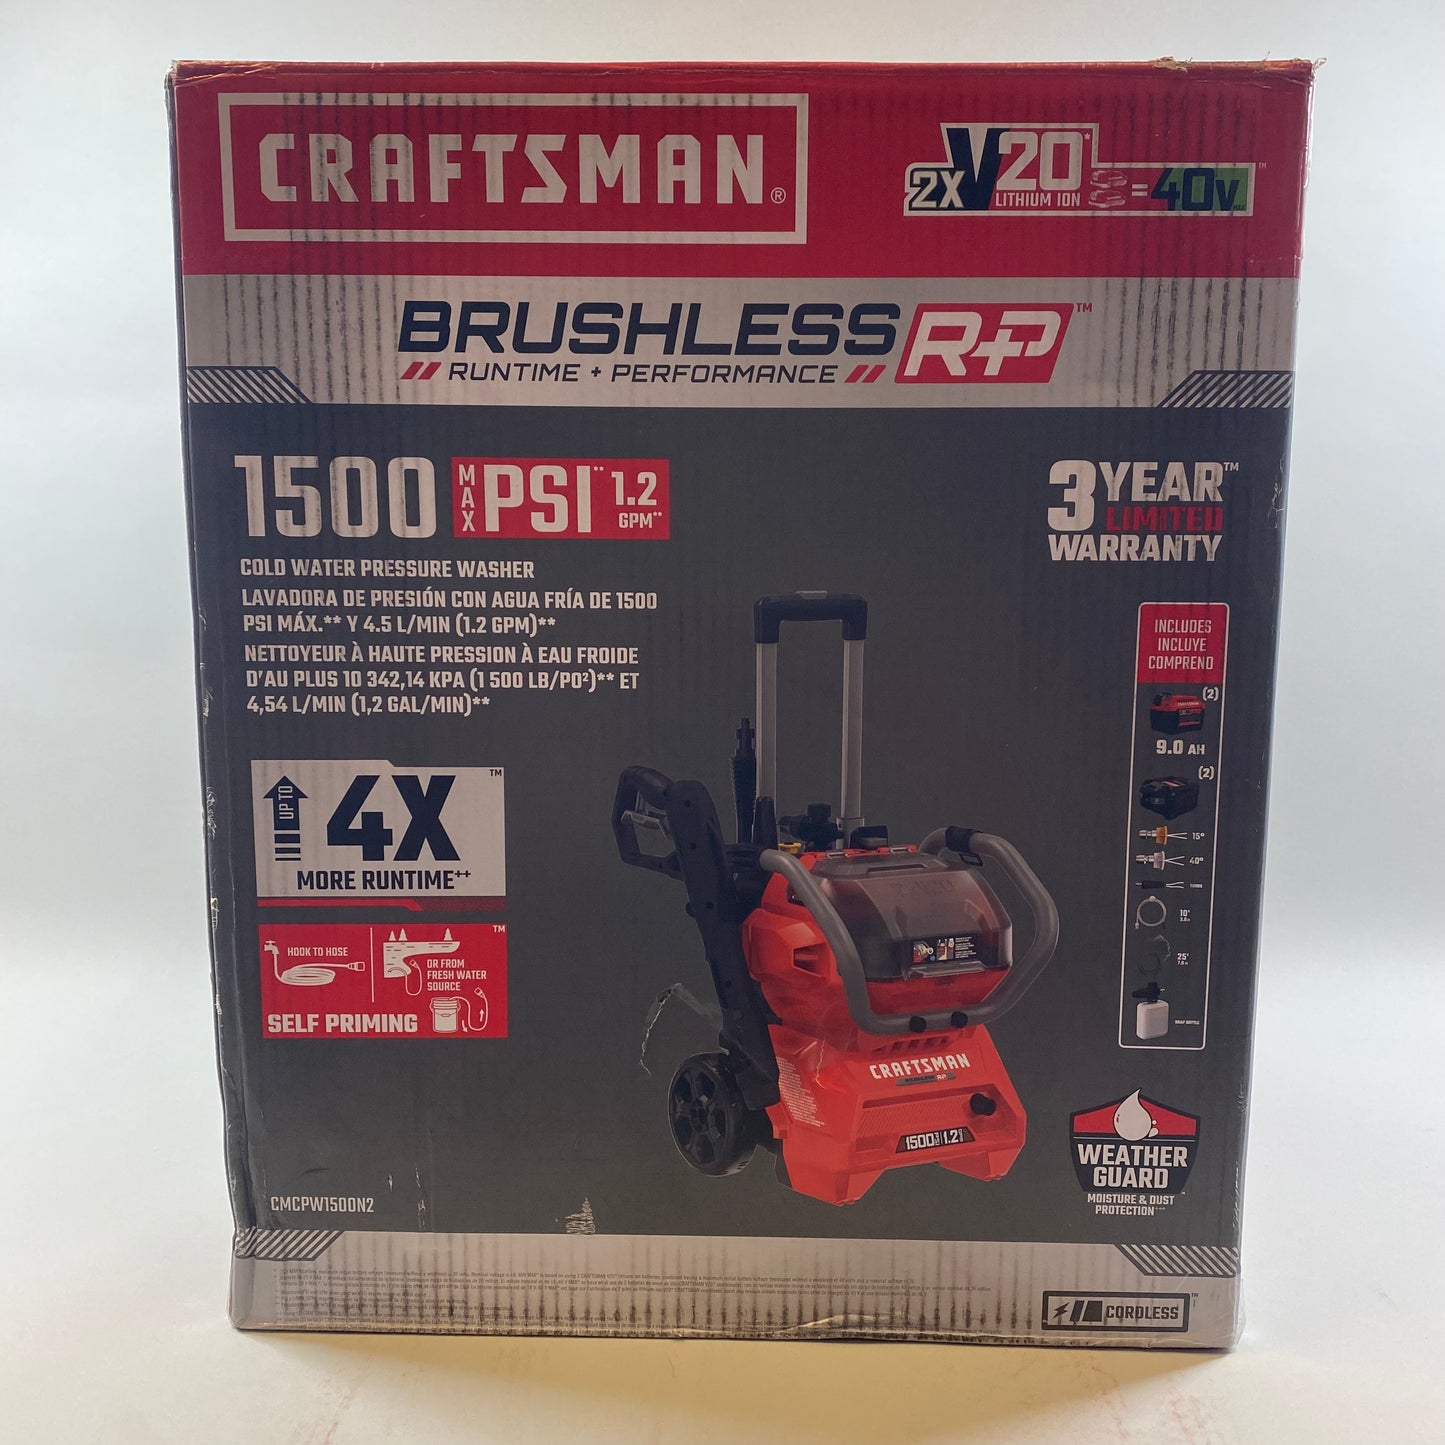 New Craftsman Brushless RP Cold Water Pressure Washer CMCPW1500N2